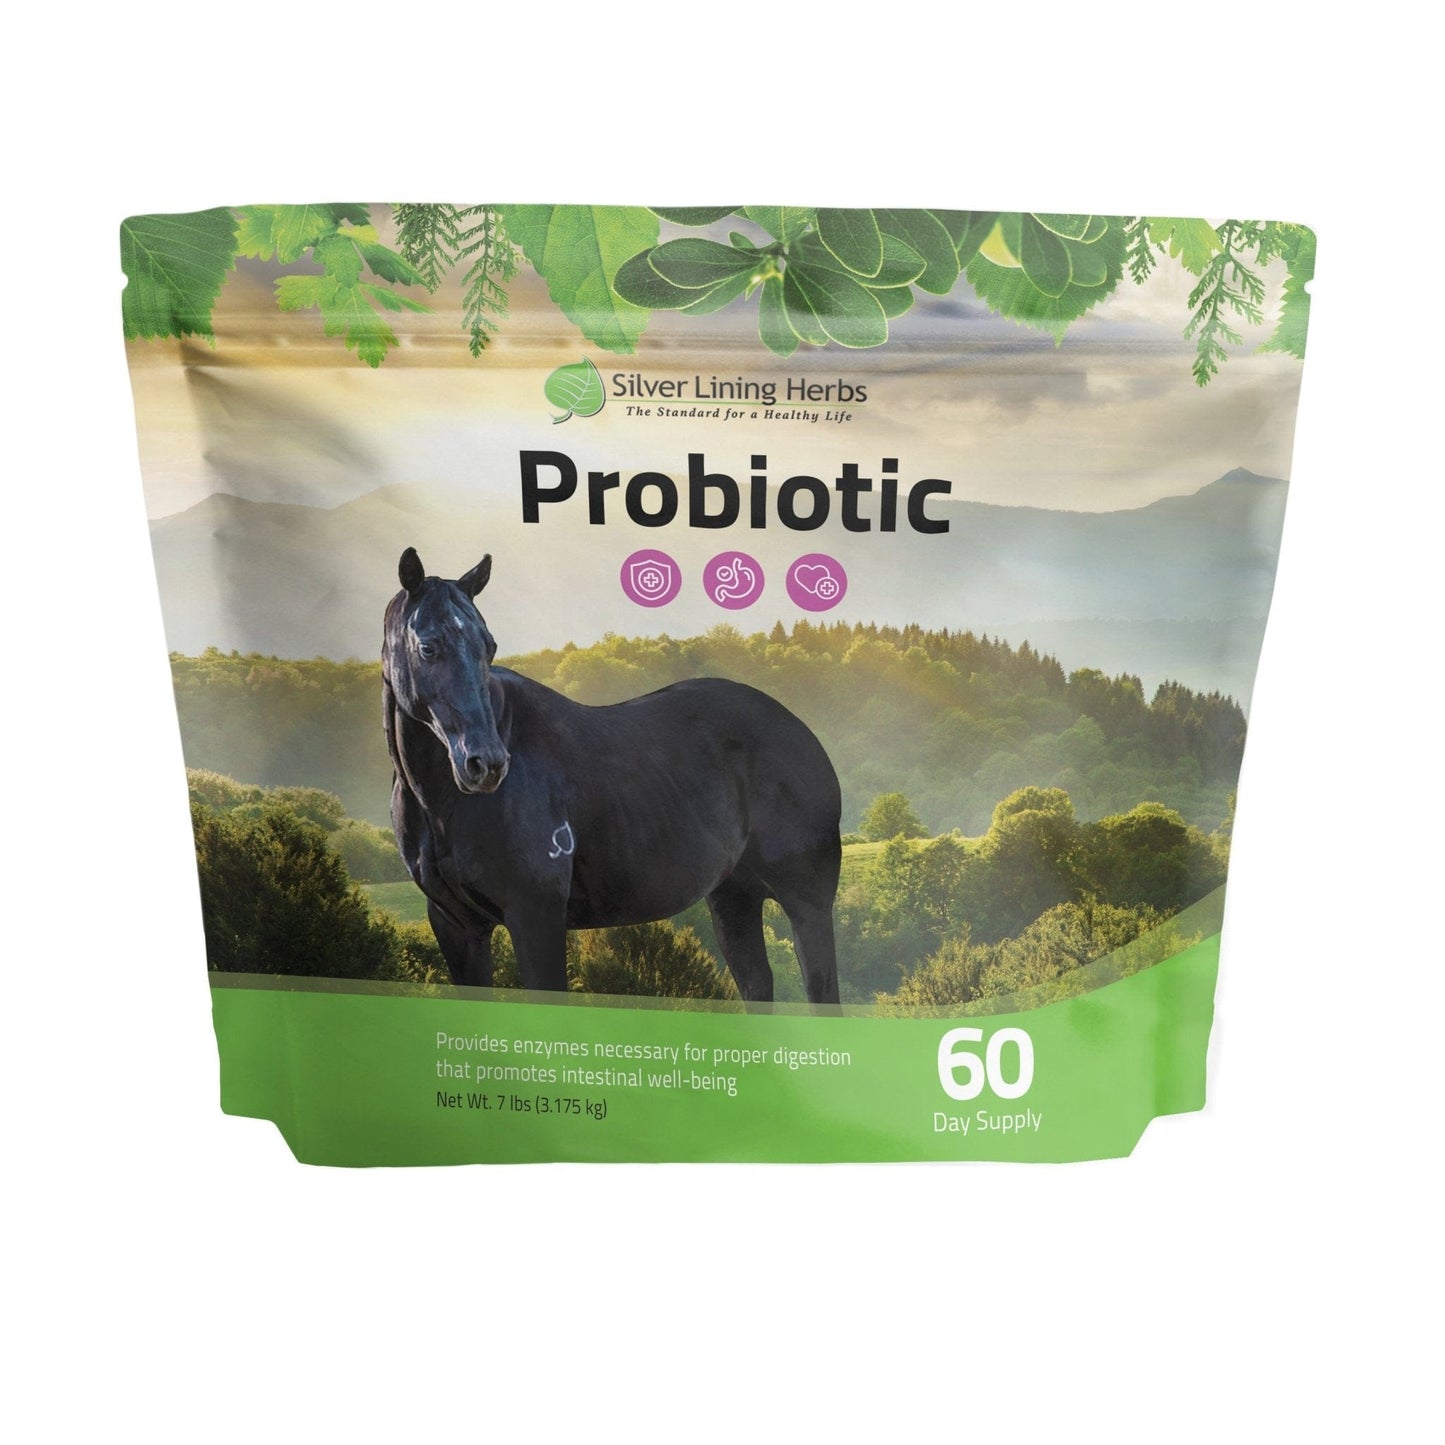 A bag of a 60-Day supply of Probiotic Herbs for Horses by Silver Lining Herbs